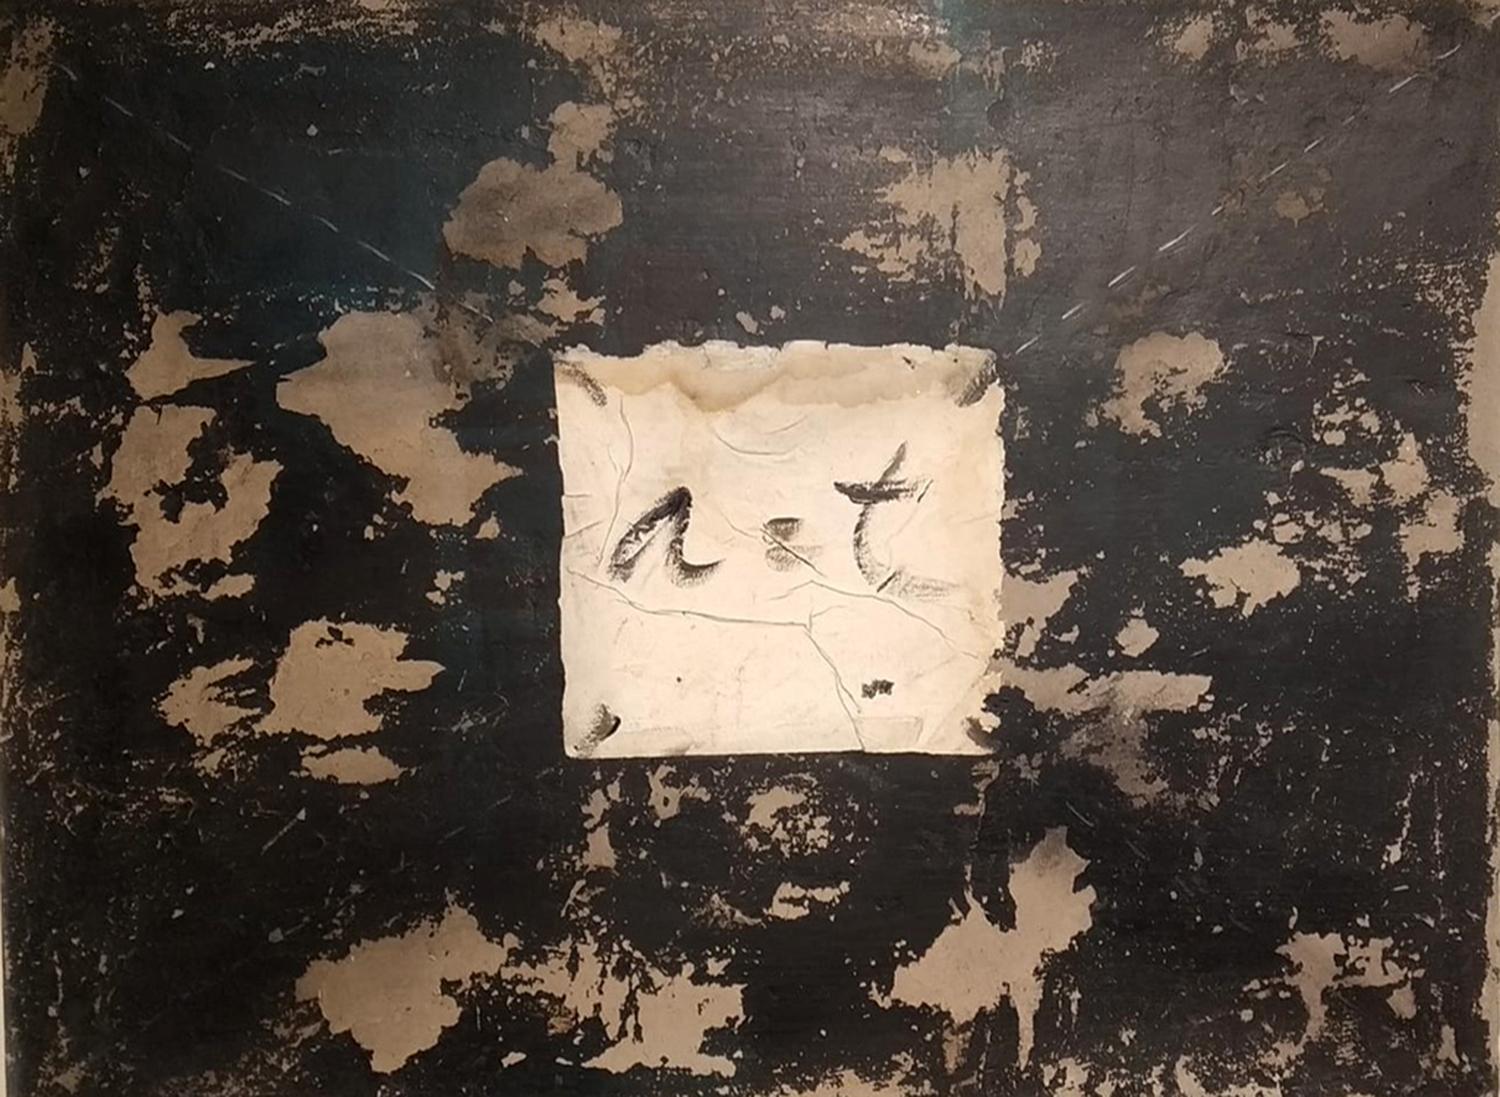 Author: Antoni Tàpies
No title
Year: 70's
Media: Painting, graphite, collage and grattage on cardboard
Signed in the lower right corner by the artist.
Piece full of symbolism.

Certified by the Comissió Tàpies (T-9900)

In the work of the 1960s and